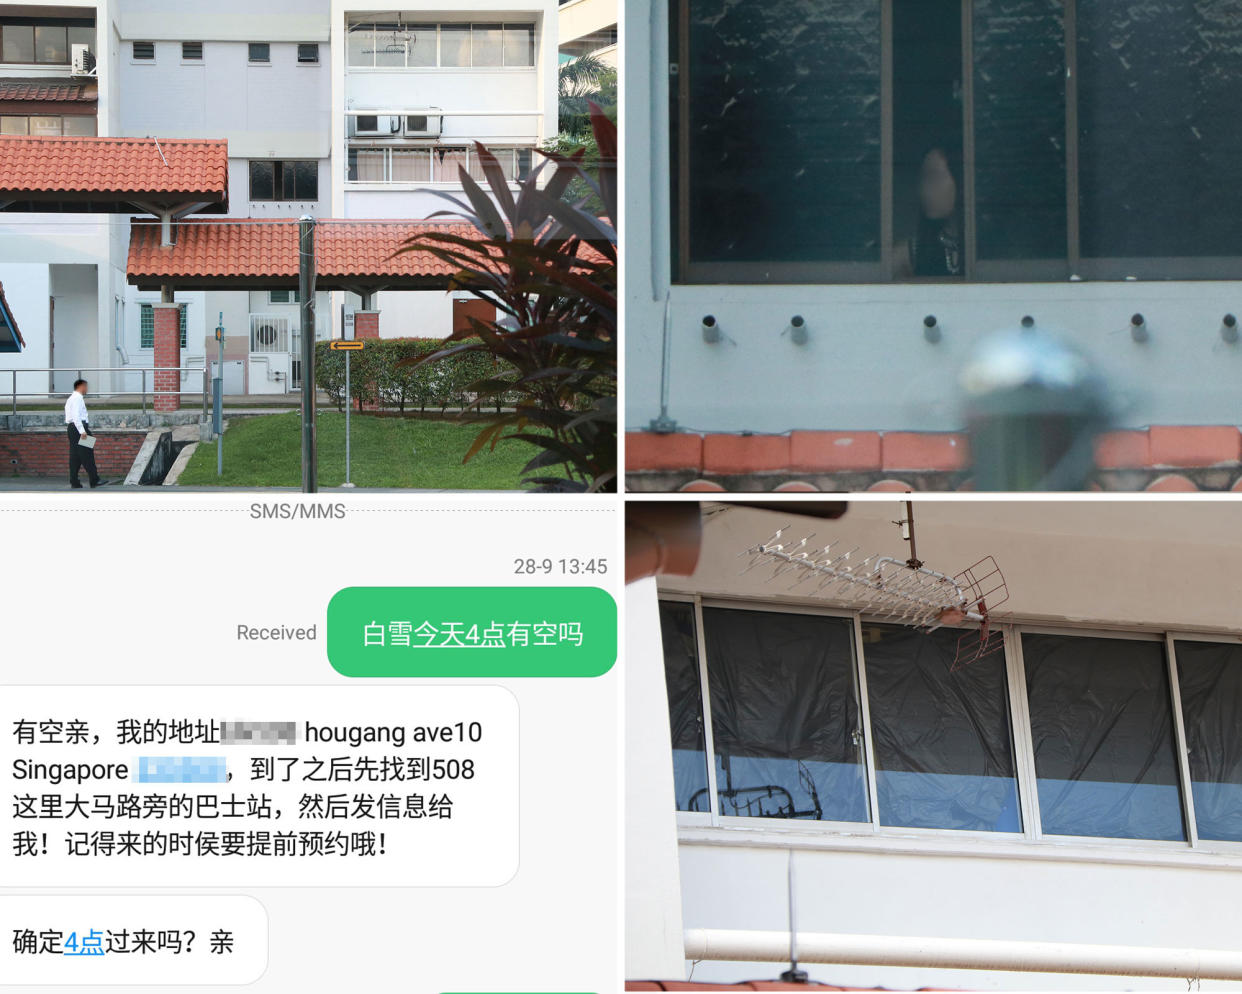 Clockwise from top left: A “customer” (in white) awaits his turn at the bus stop below the unit where the suspected vice activities are carried out; a woman seen in the unit; the covered up windows of the unit’s upper floor; and a text message from one of the alleged prostitutes containing directions to the Hougang flat. (PHOTOS: Dhany Osman / Yahoo News Singapore)